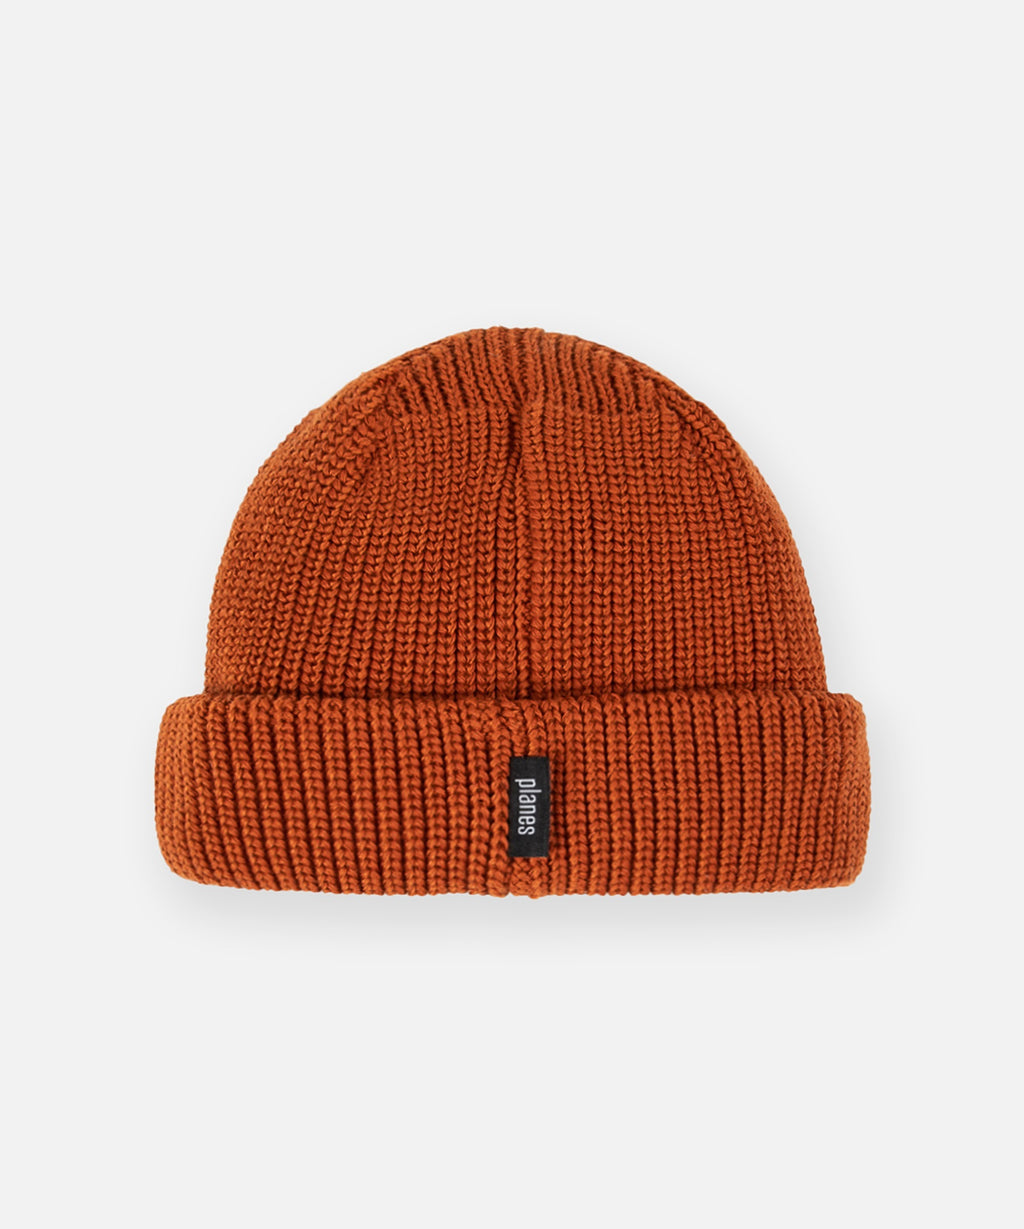  Planes label on back brim of Paper Planes Wharfman Beanie, color Ginger.